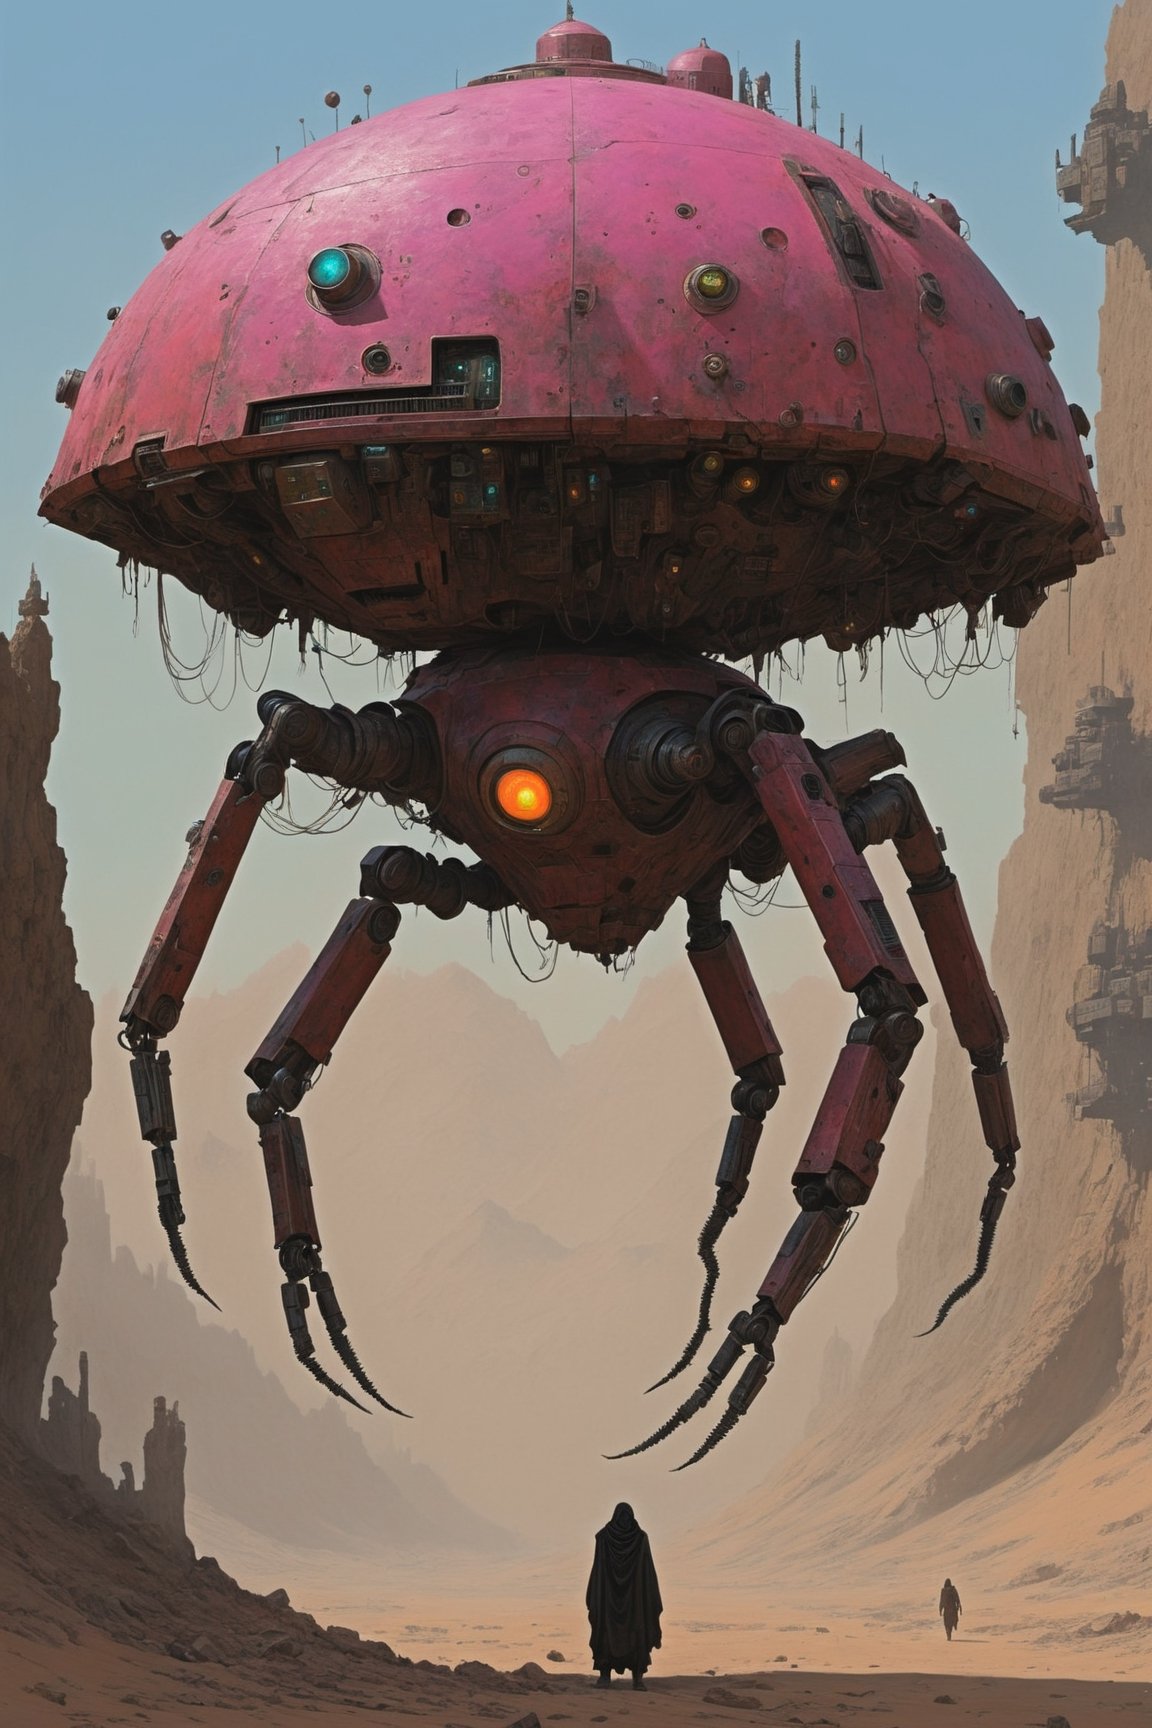 Fallout 5 Levitating Drone Companion, affectionately known as the "(((Squidrone,)))" a versatile and formidable ally equipped with levitation technology, a plethora of sensors, and both defensive and offensive capabilities.

,digital artwork by Beksinski